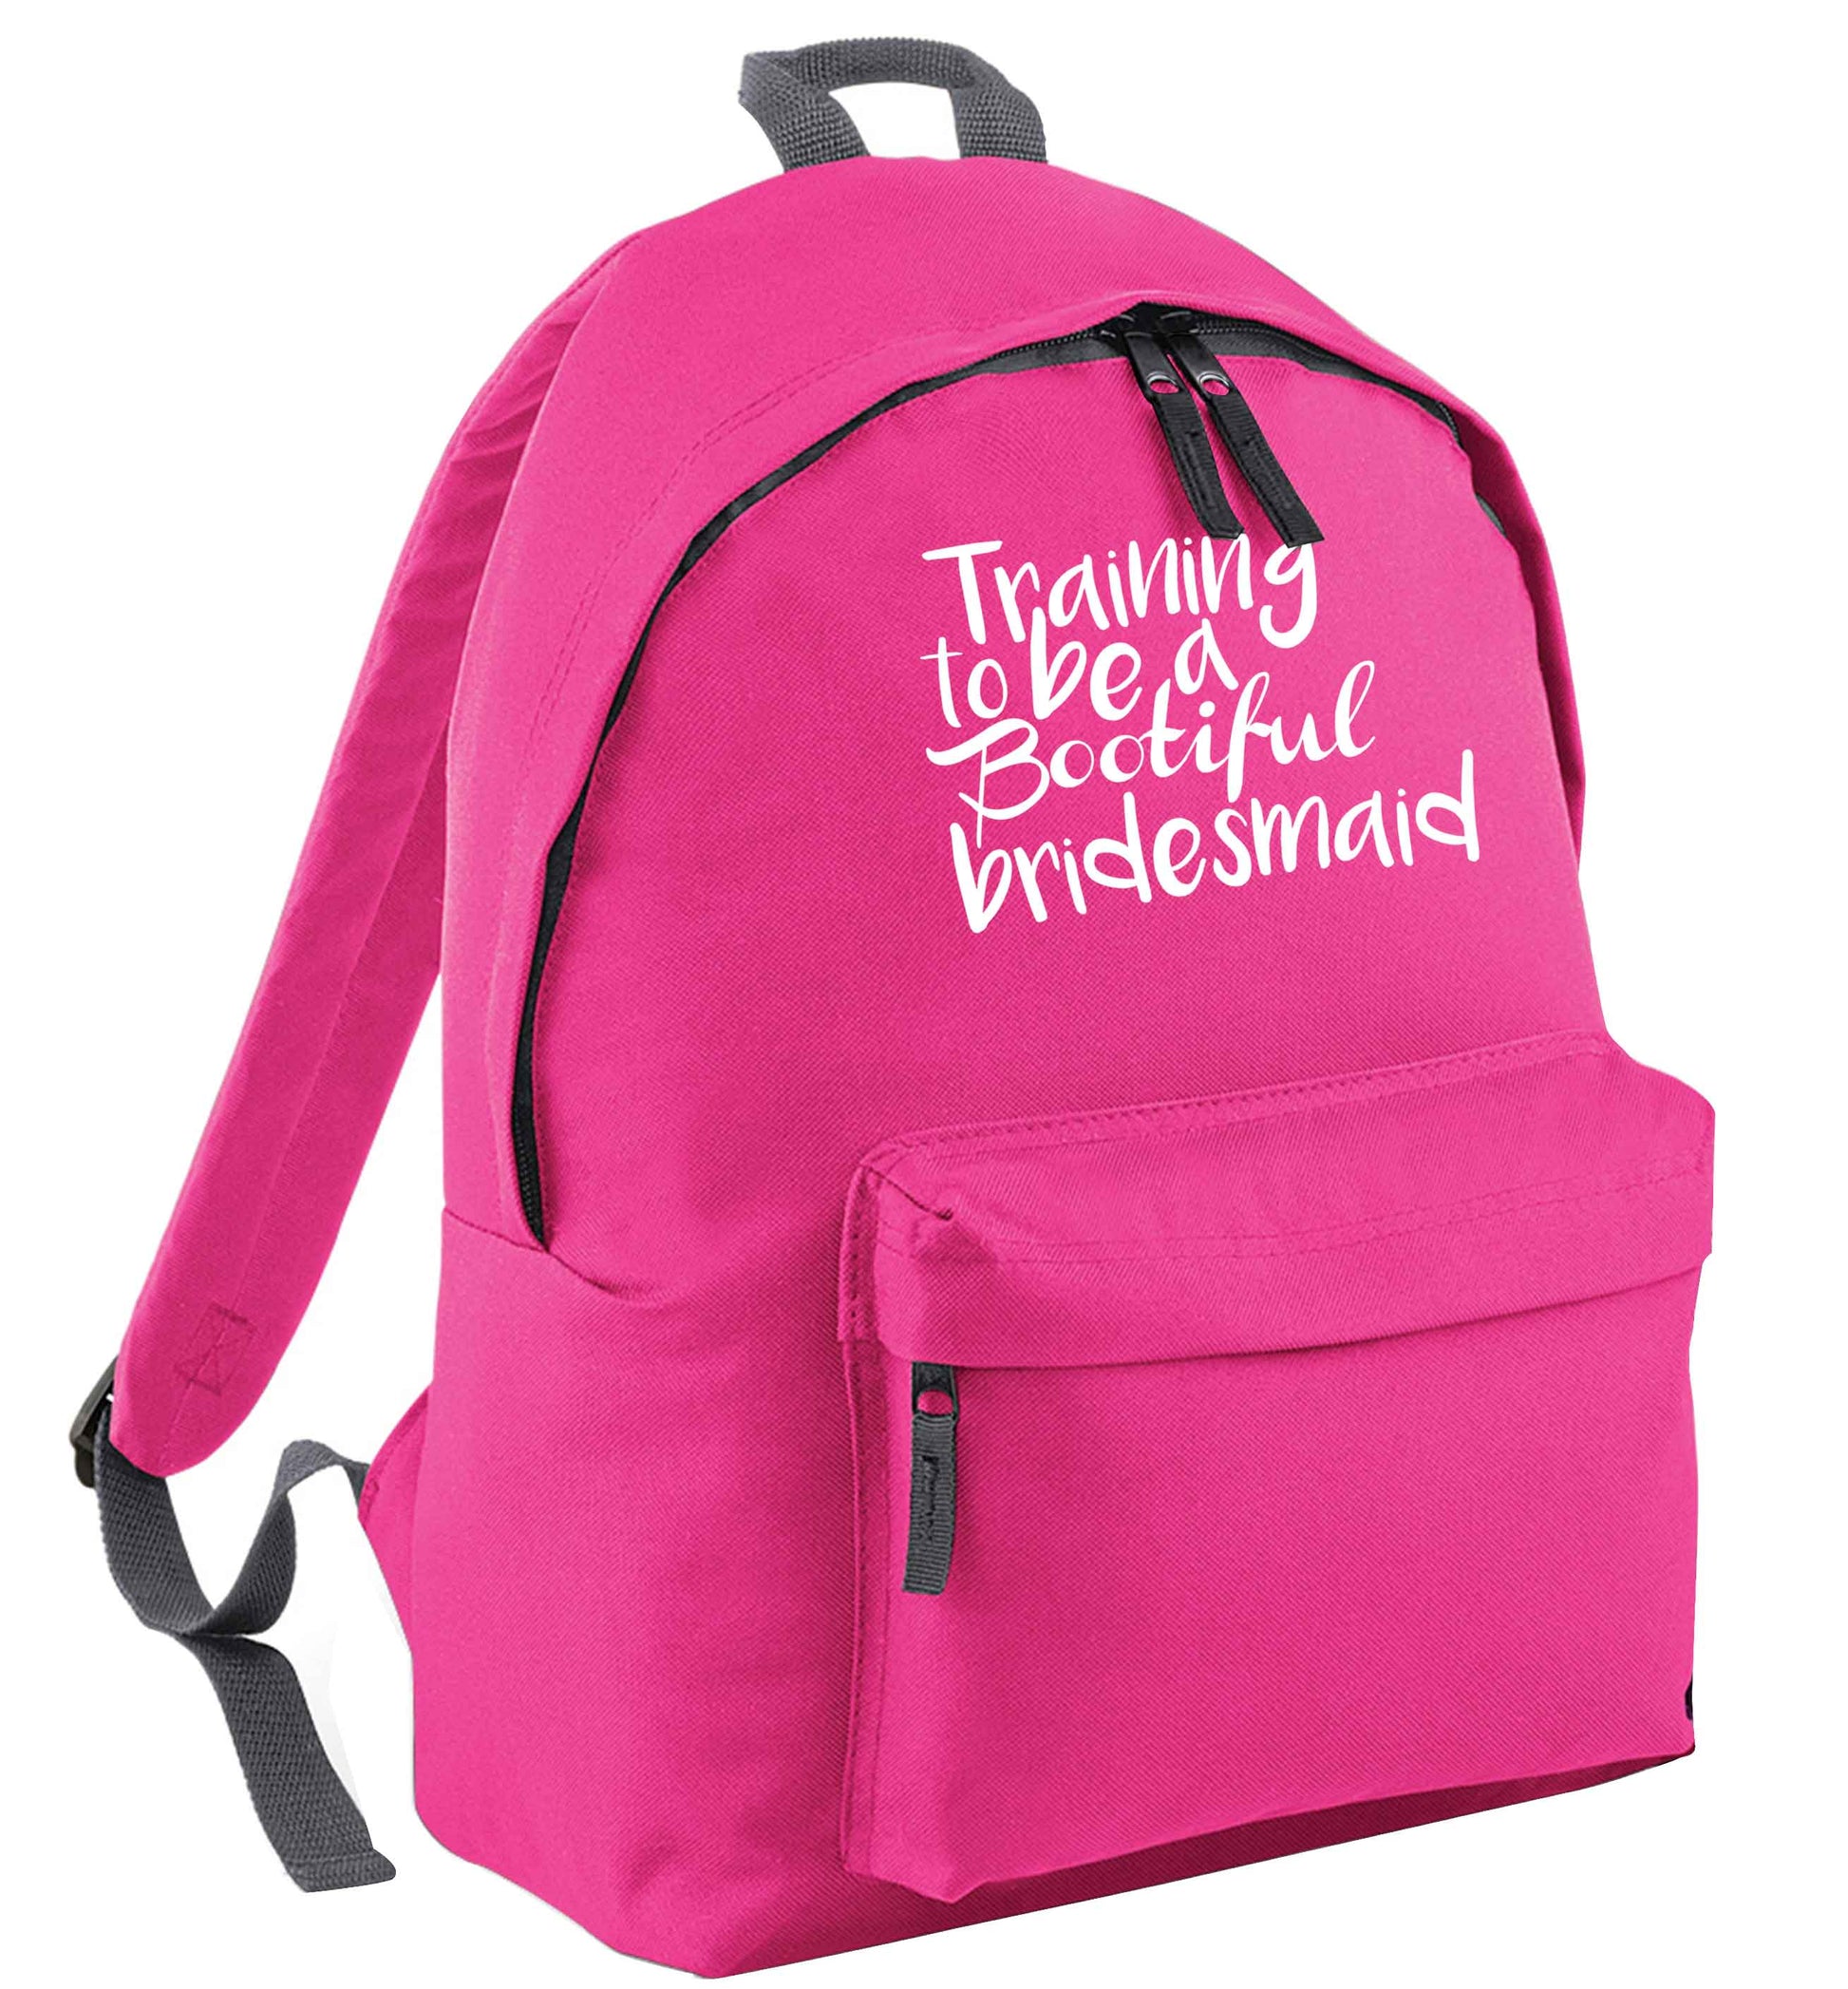 Get motivated and get fit for your big day! Our workout quotes and designs will get you ready to sweat! Perfect for any bride, groom or bridesmaid to be!  pink adults backpack